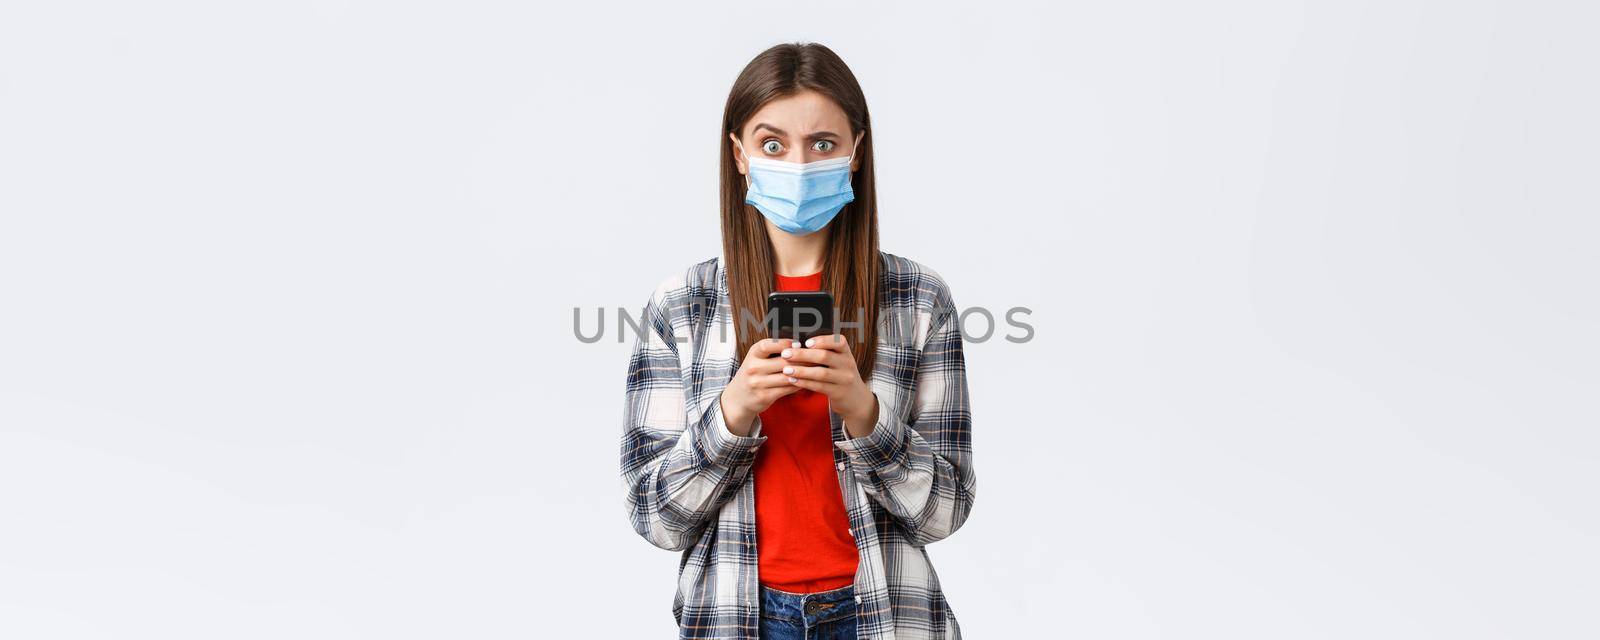 Different emotions, covid-19, social distancing and technology concept. Puzzled and confused young woman in medical mask react to strange message, hold mobile phone, look camera unsure.